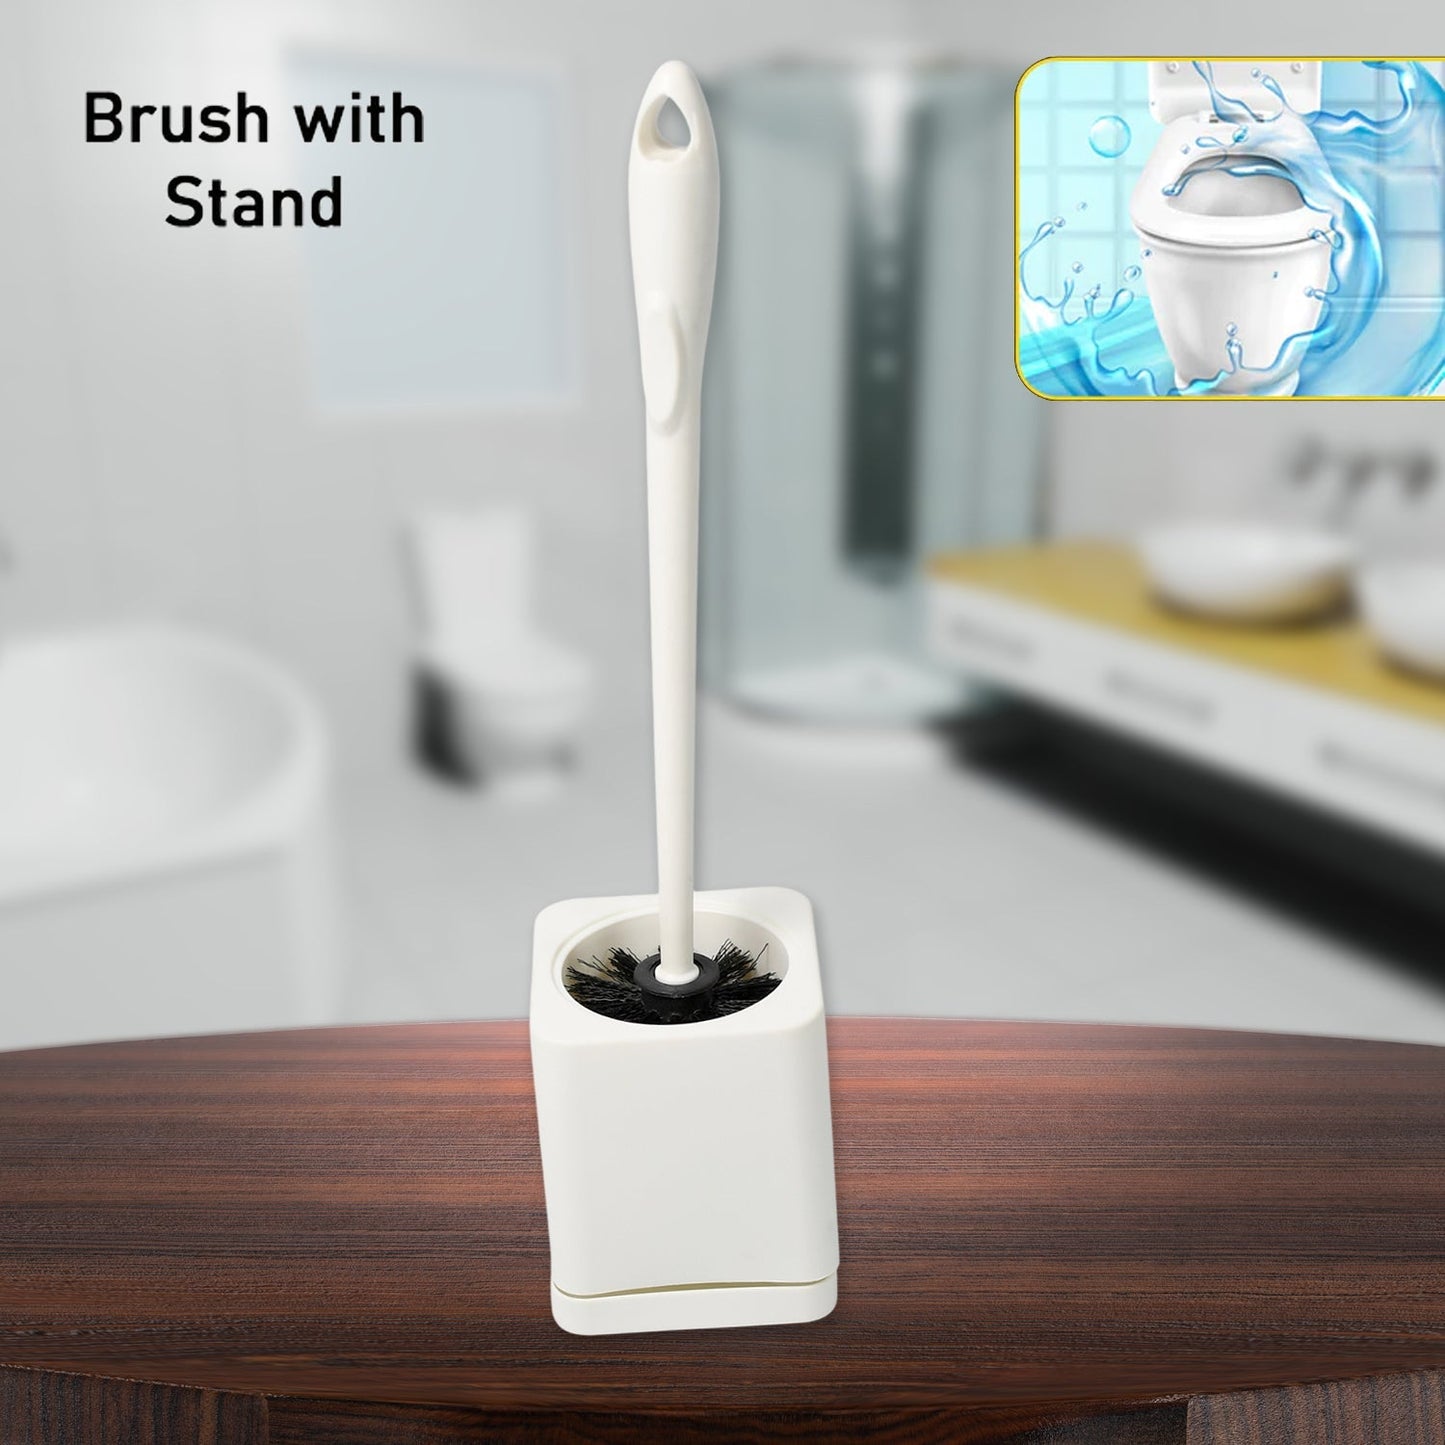 Toilet Brush Set Household Cleaning Toilet Brushes Holder Sets Home Bathroom Hotel Long Handle No Dead Angle Decontamination Floor-mounted Wall-mounted Cleaner Brush Tool